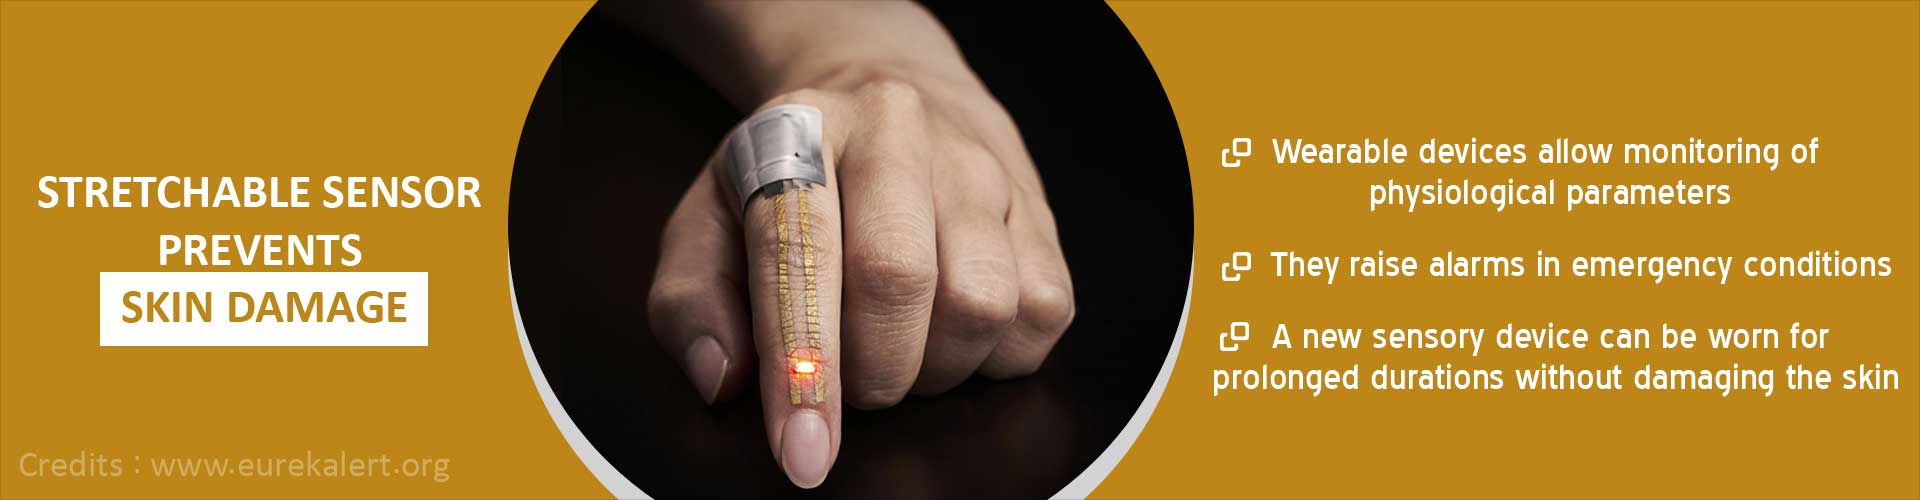 Stretchable sensor prevents skin damage
- Wearable devices allow monitoring of physiological parameters
- They raise alarms in emergency conditions
- A new sensory device can be worn for prolonged durations without damaging the skin